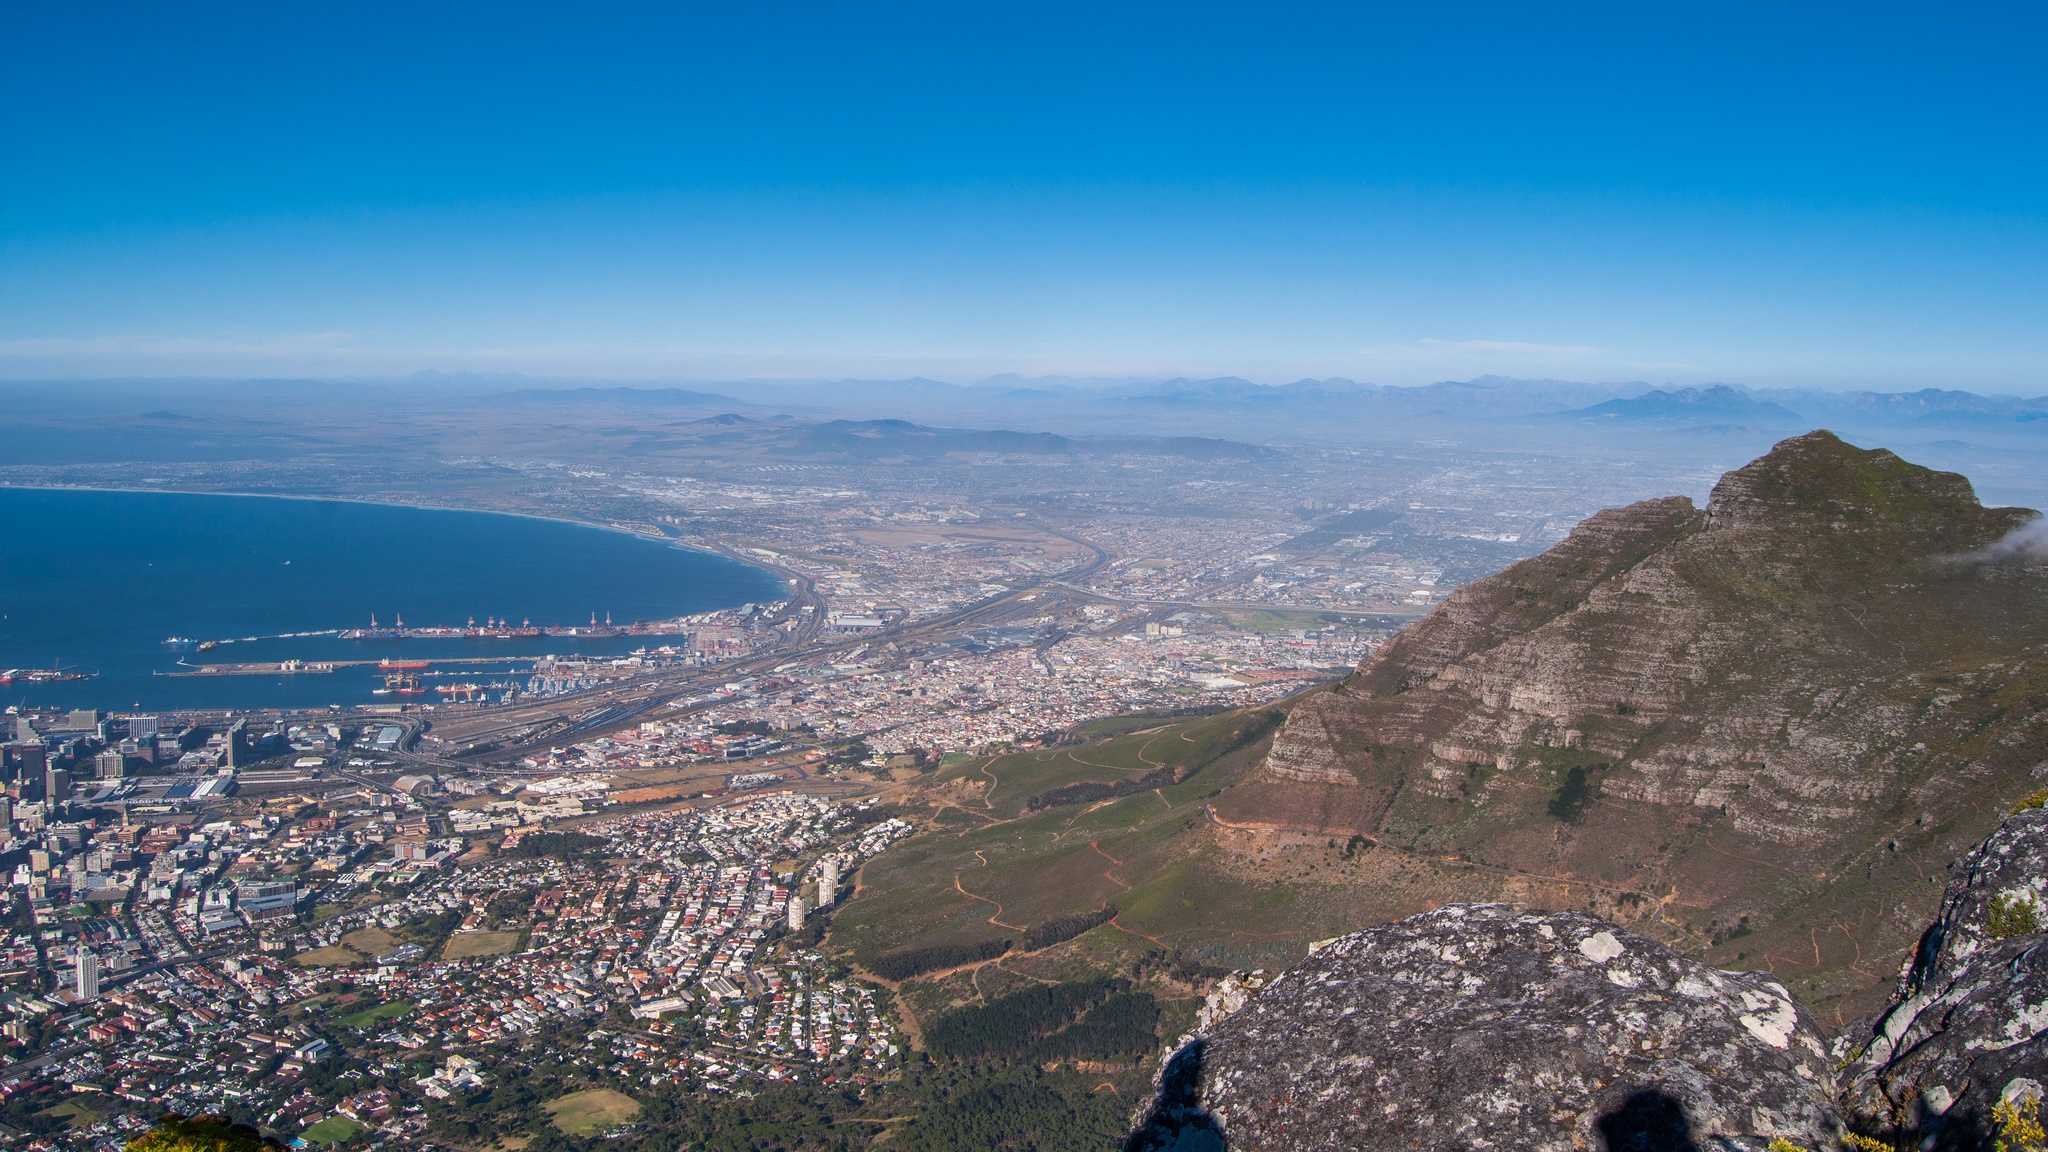 A city of 4 million people, Cape Town is banning outdoor water use in response to the worst drought in more than a century. Photo courtesy of Flickr/Creative Commons user merajchhaya